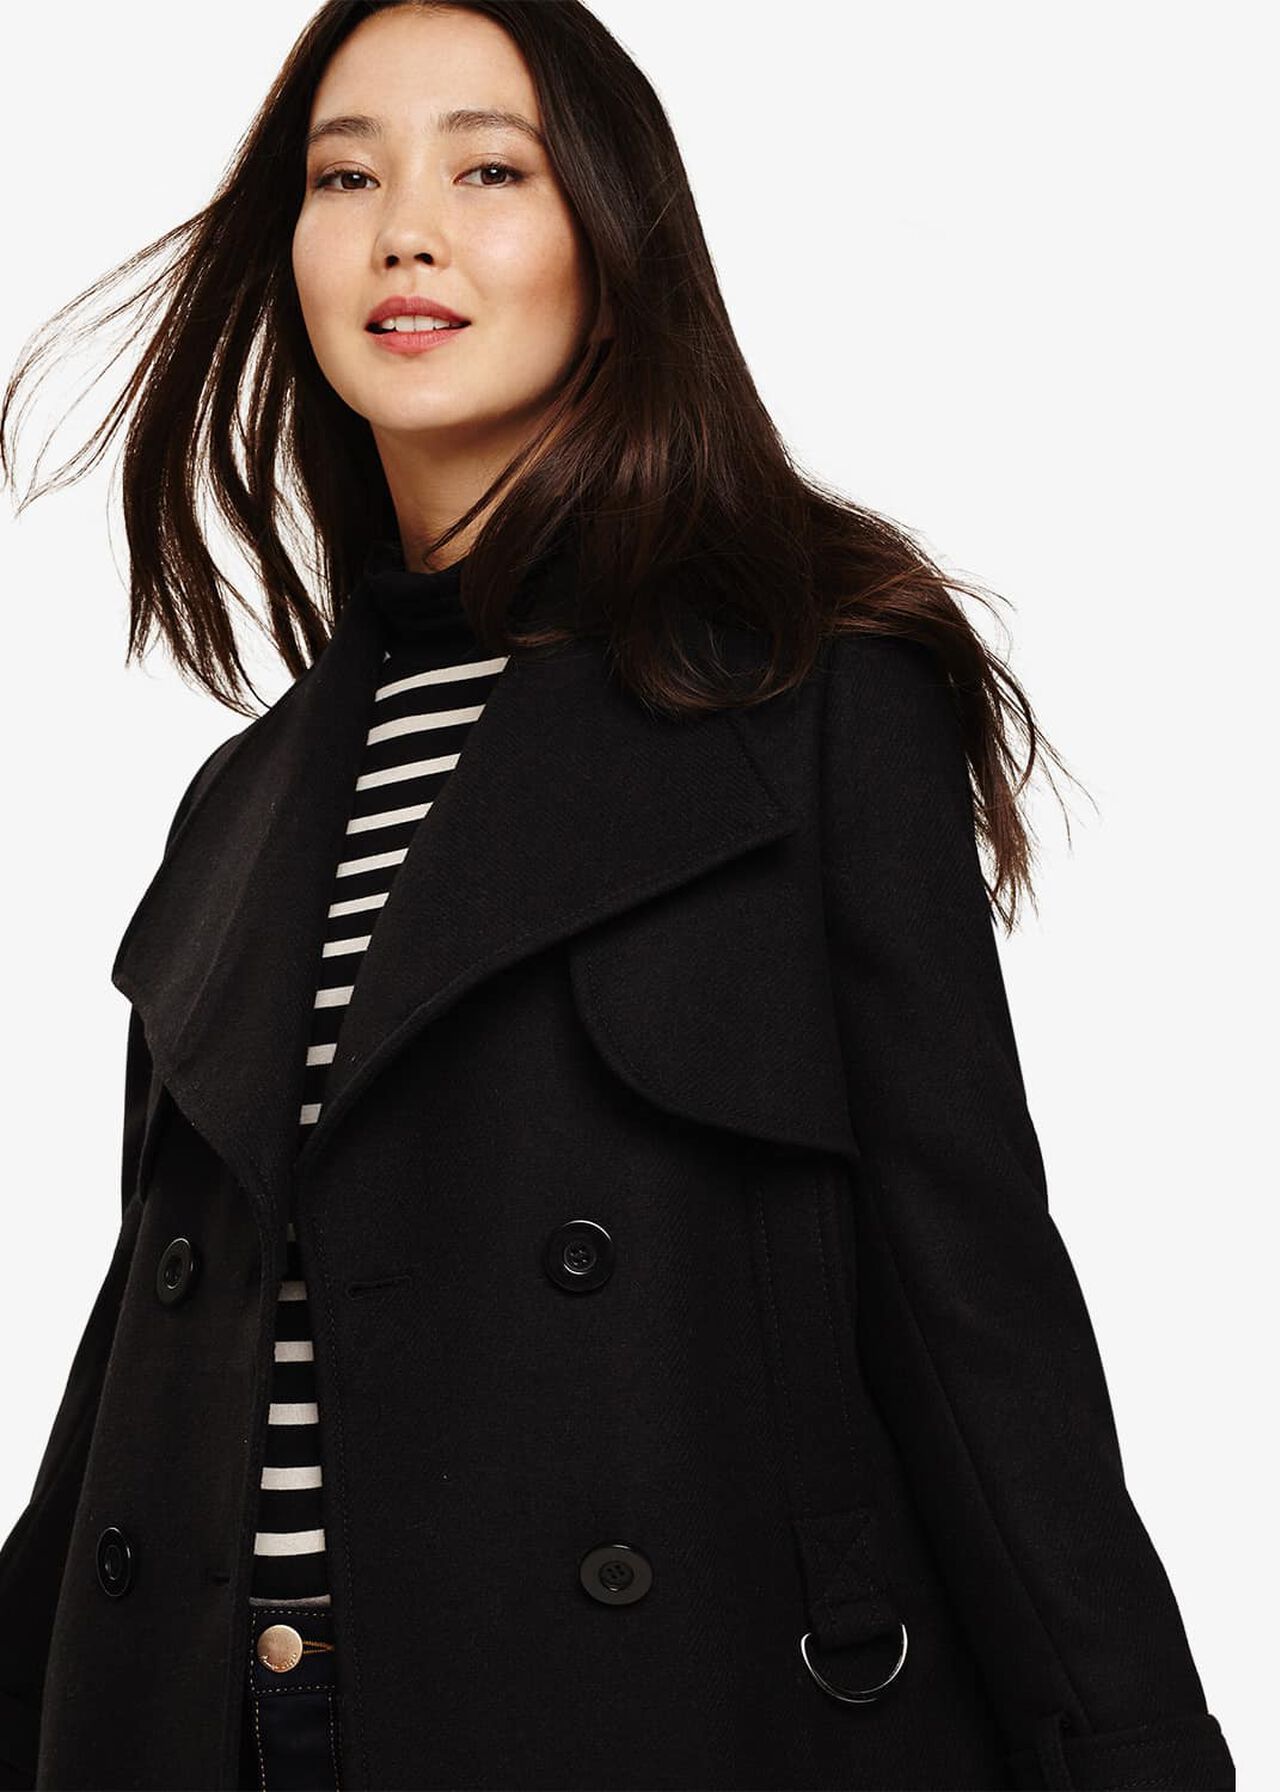 How To Style A Long Coat When You're Petite - Poor Little It Girl